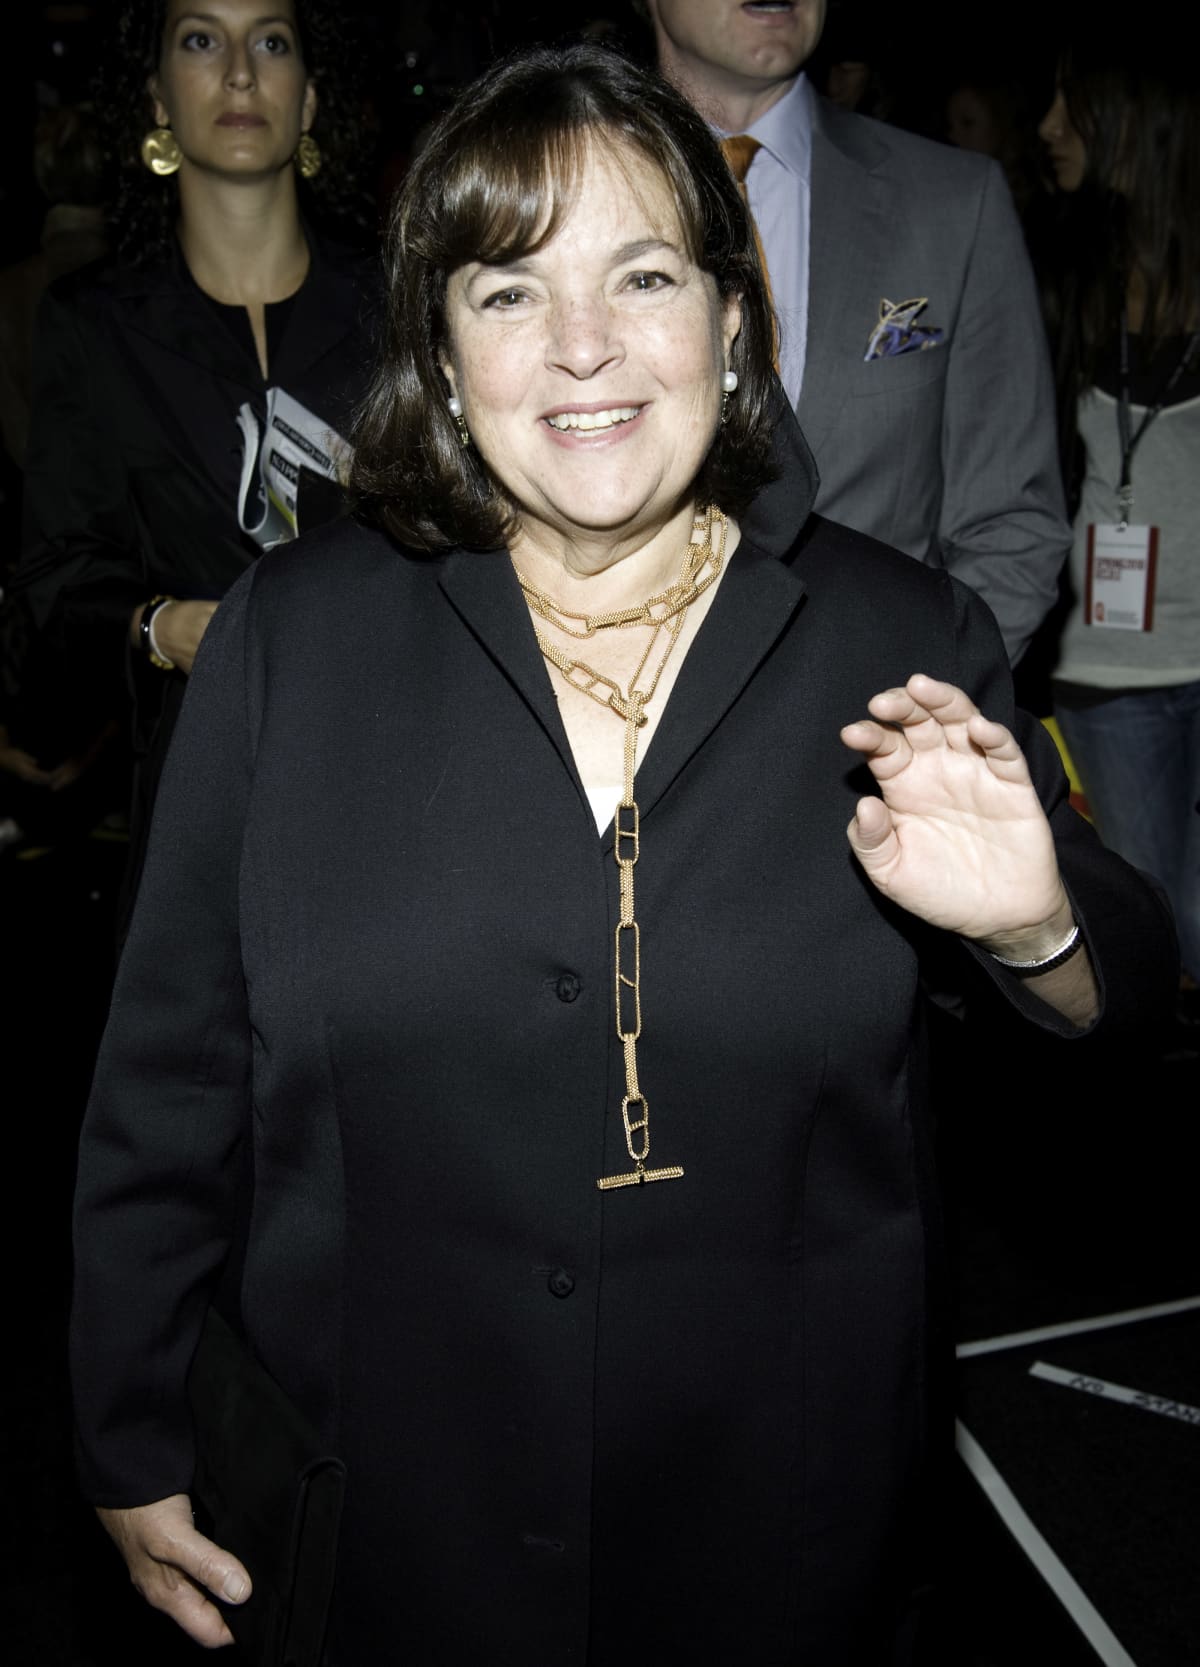 Celebrity chef Ina Garten waving and smiling